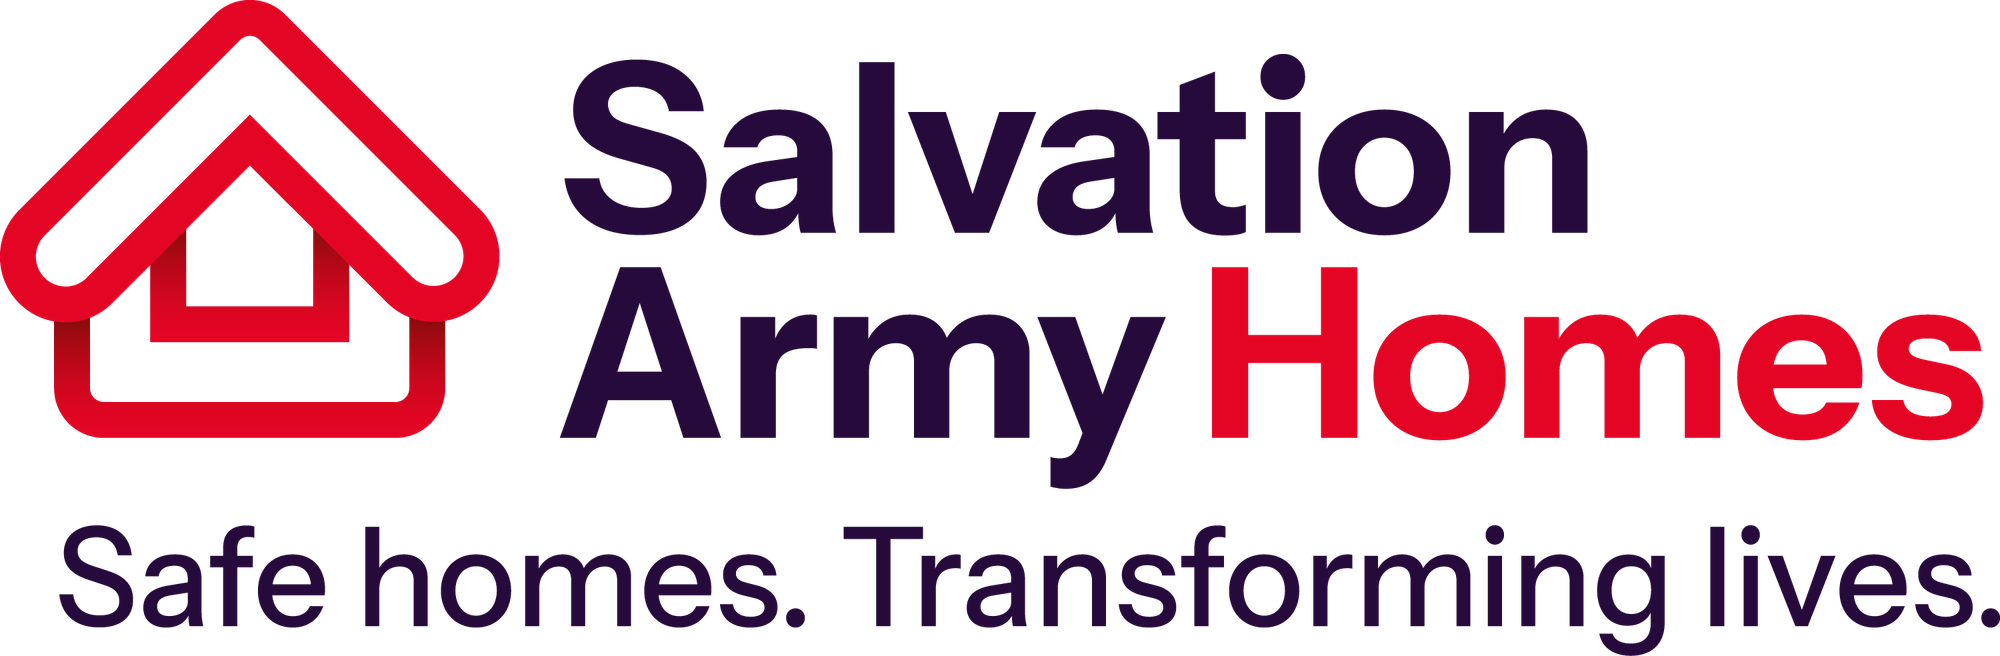 England: Salvation Army Housing Association rebrands with refreshed mission